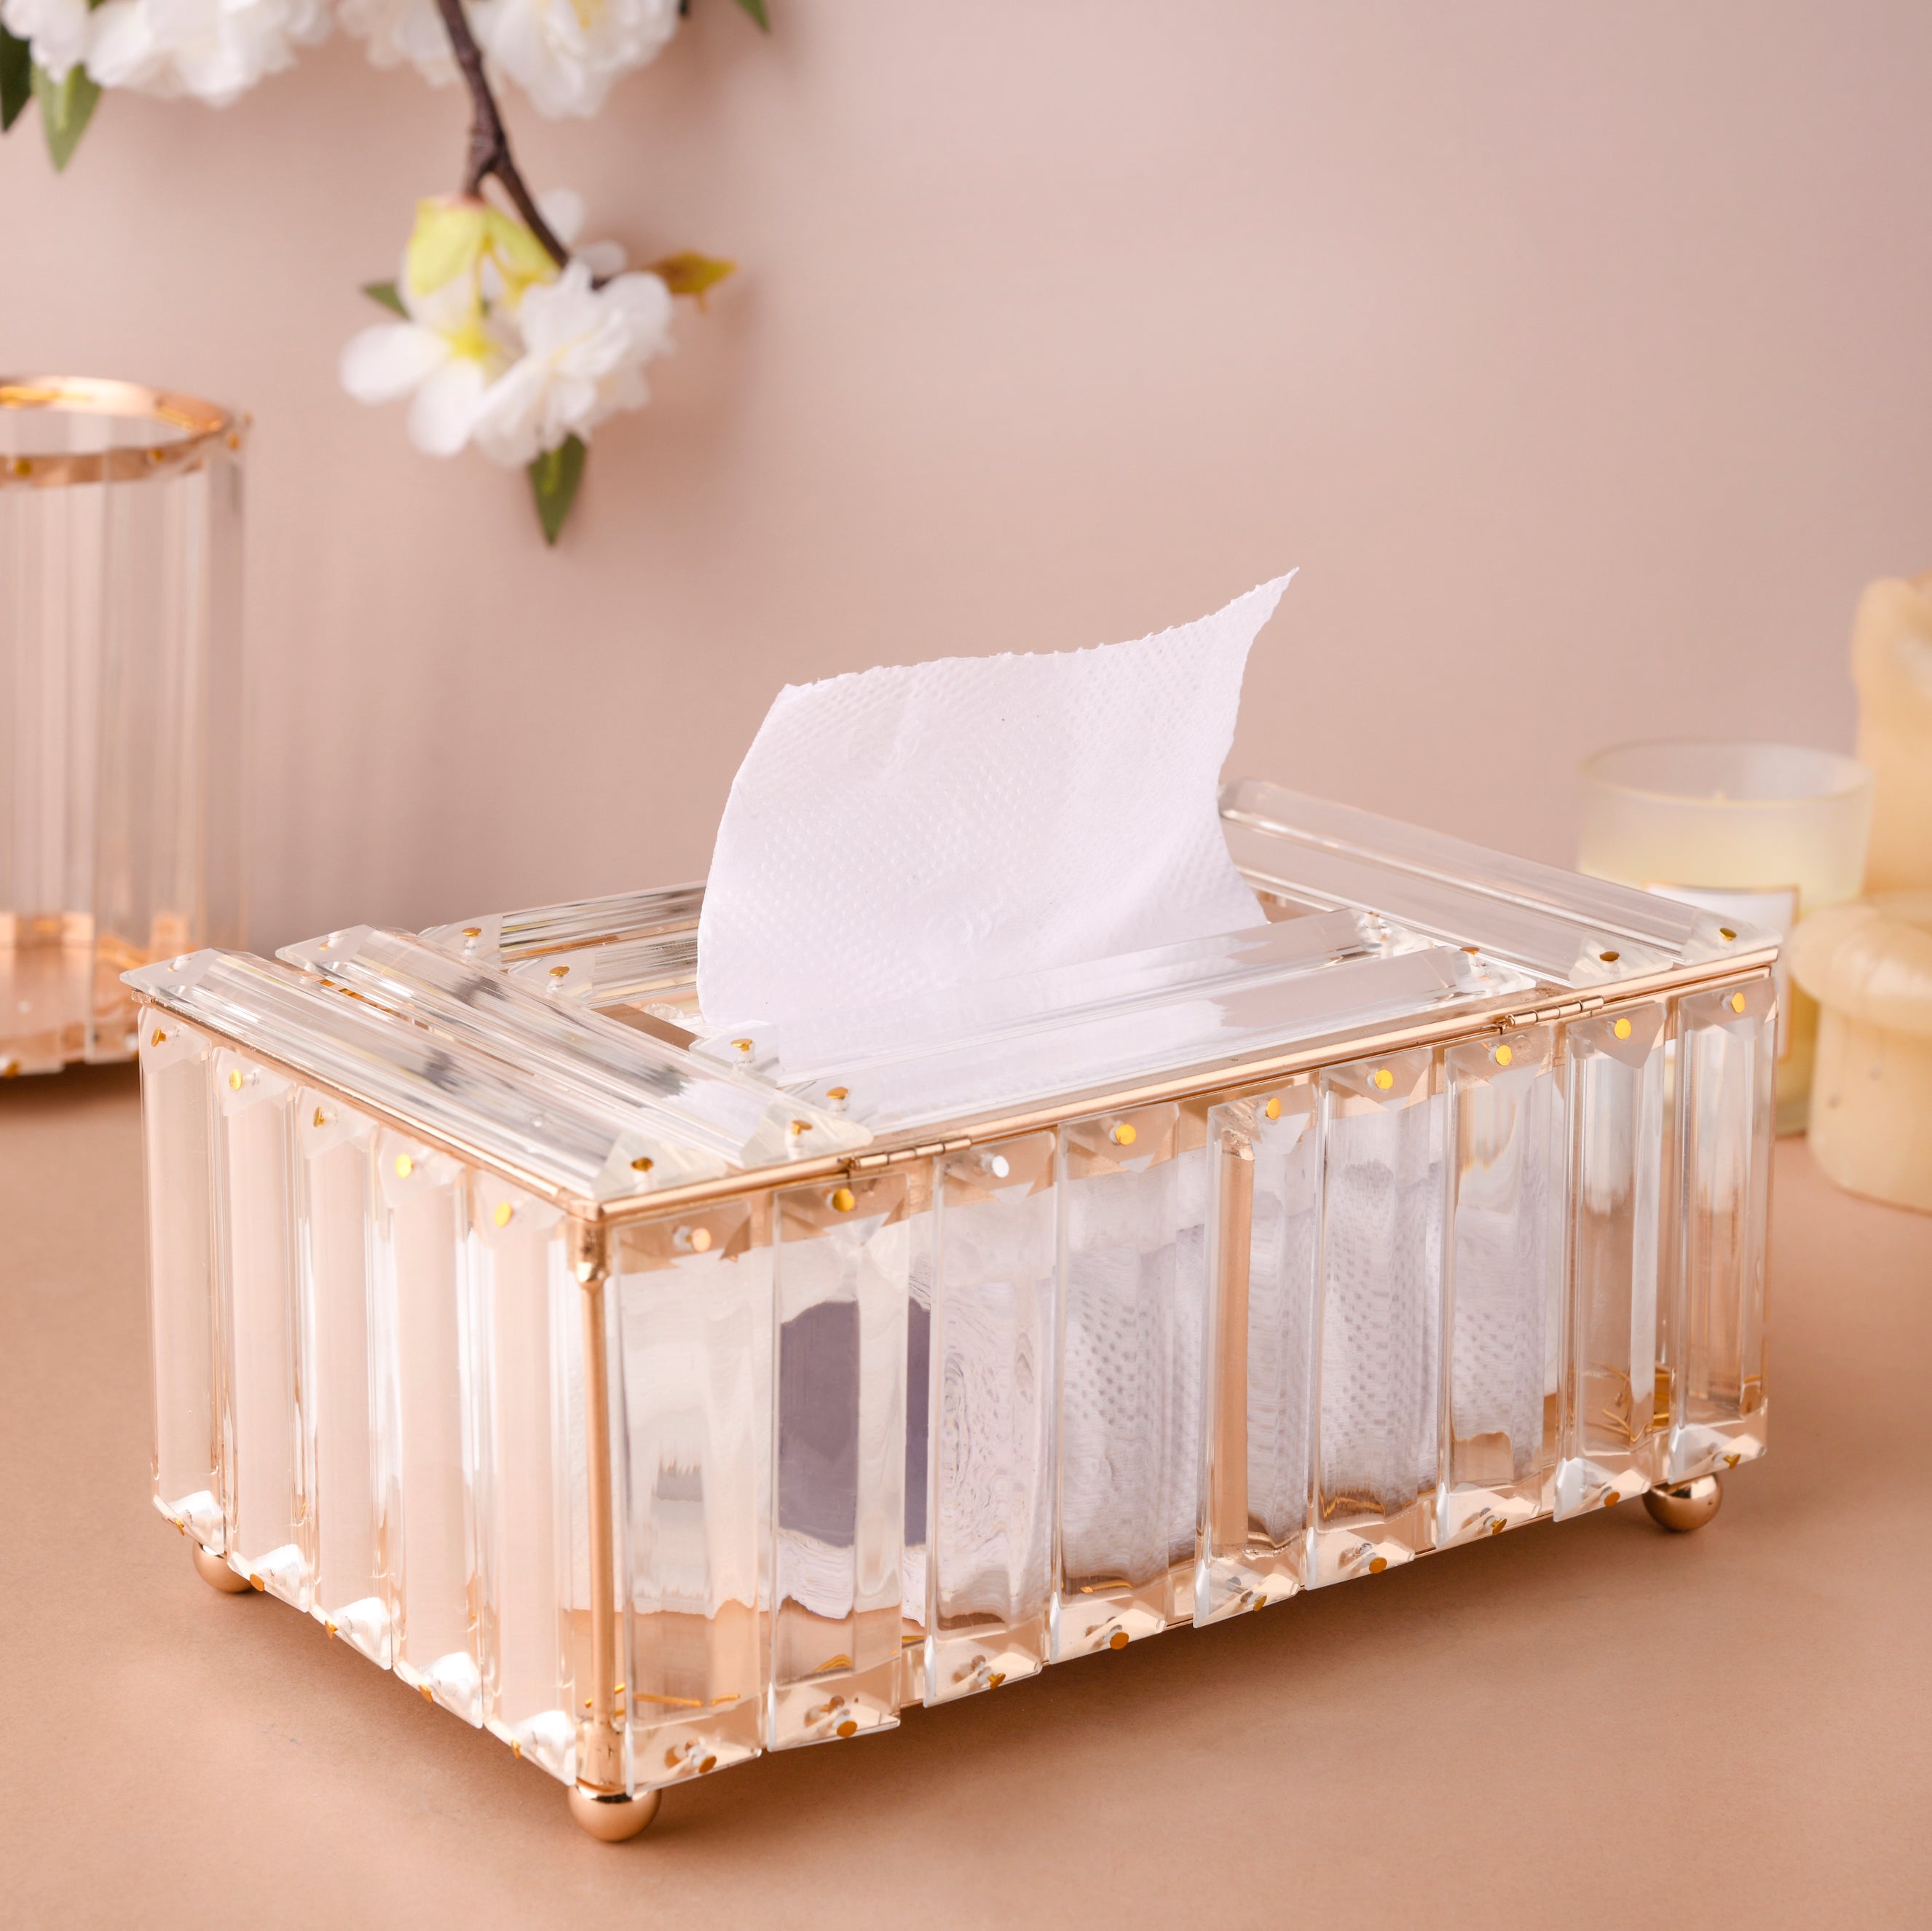 Tissue Box - Buy Crystal Tissue Box Online In India